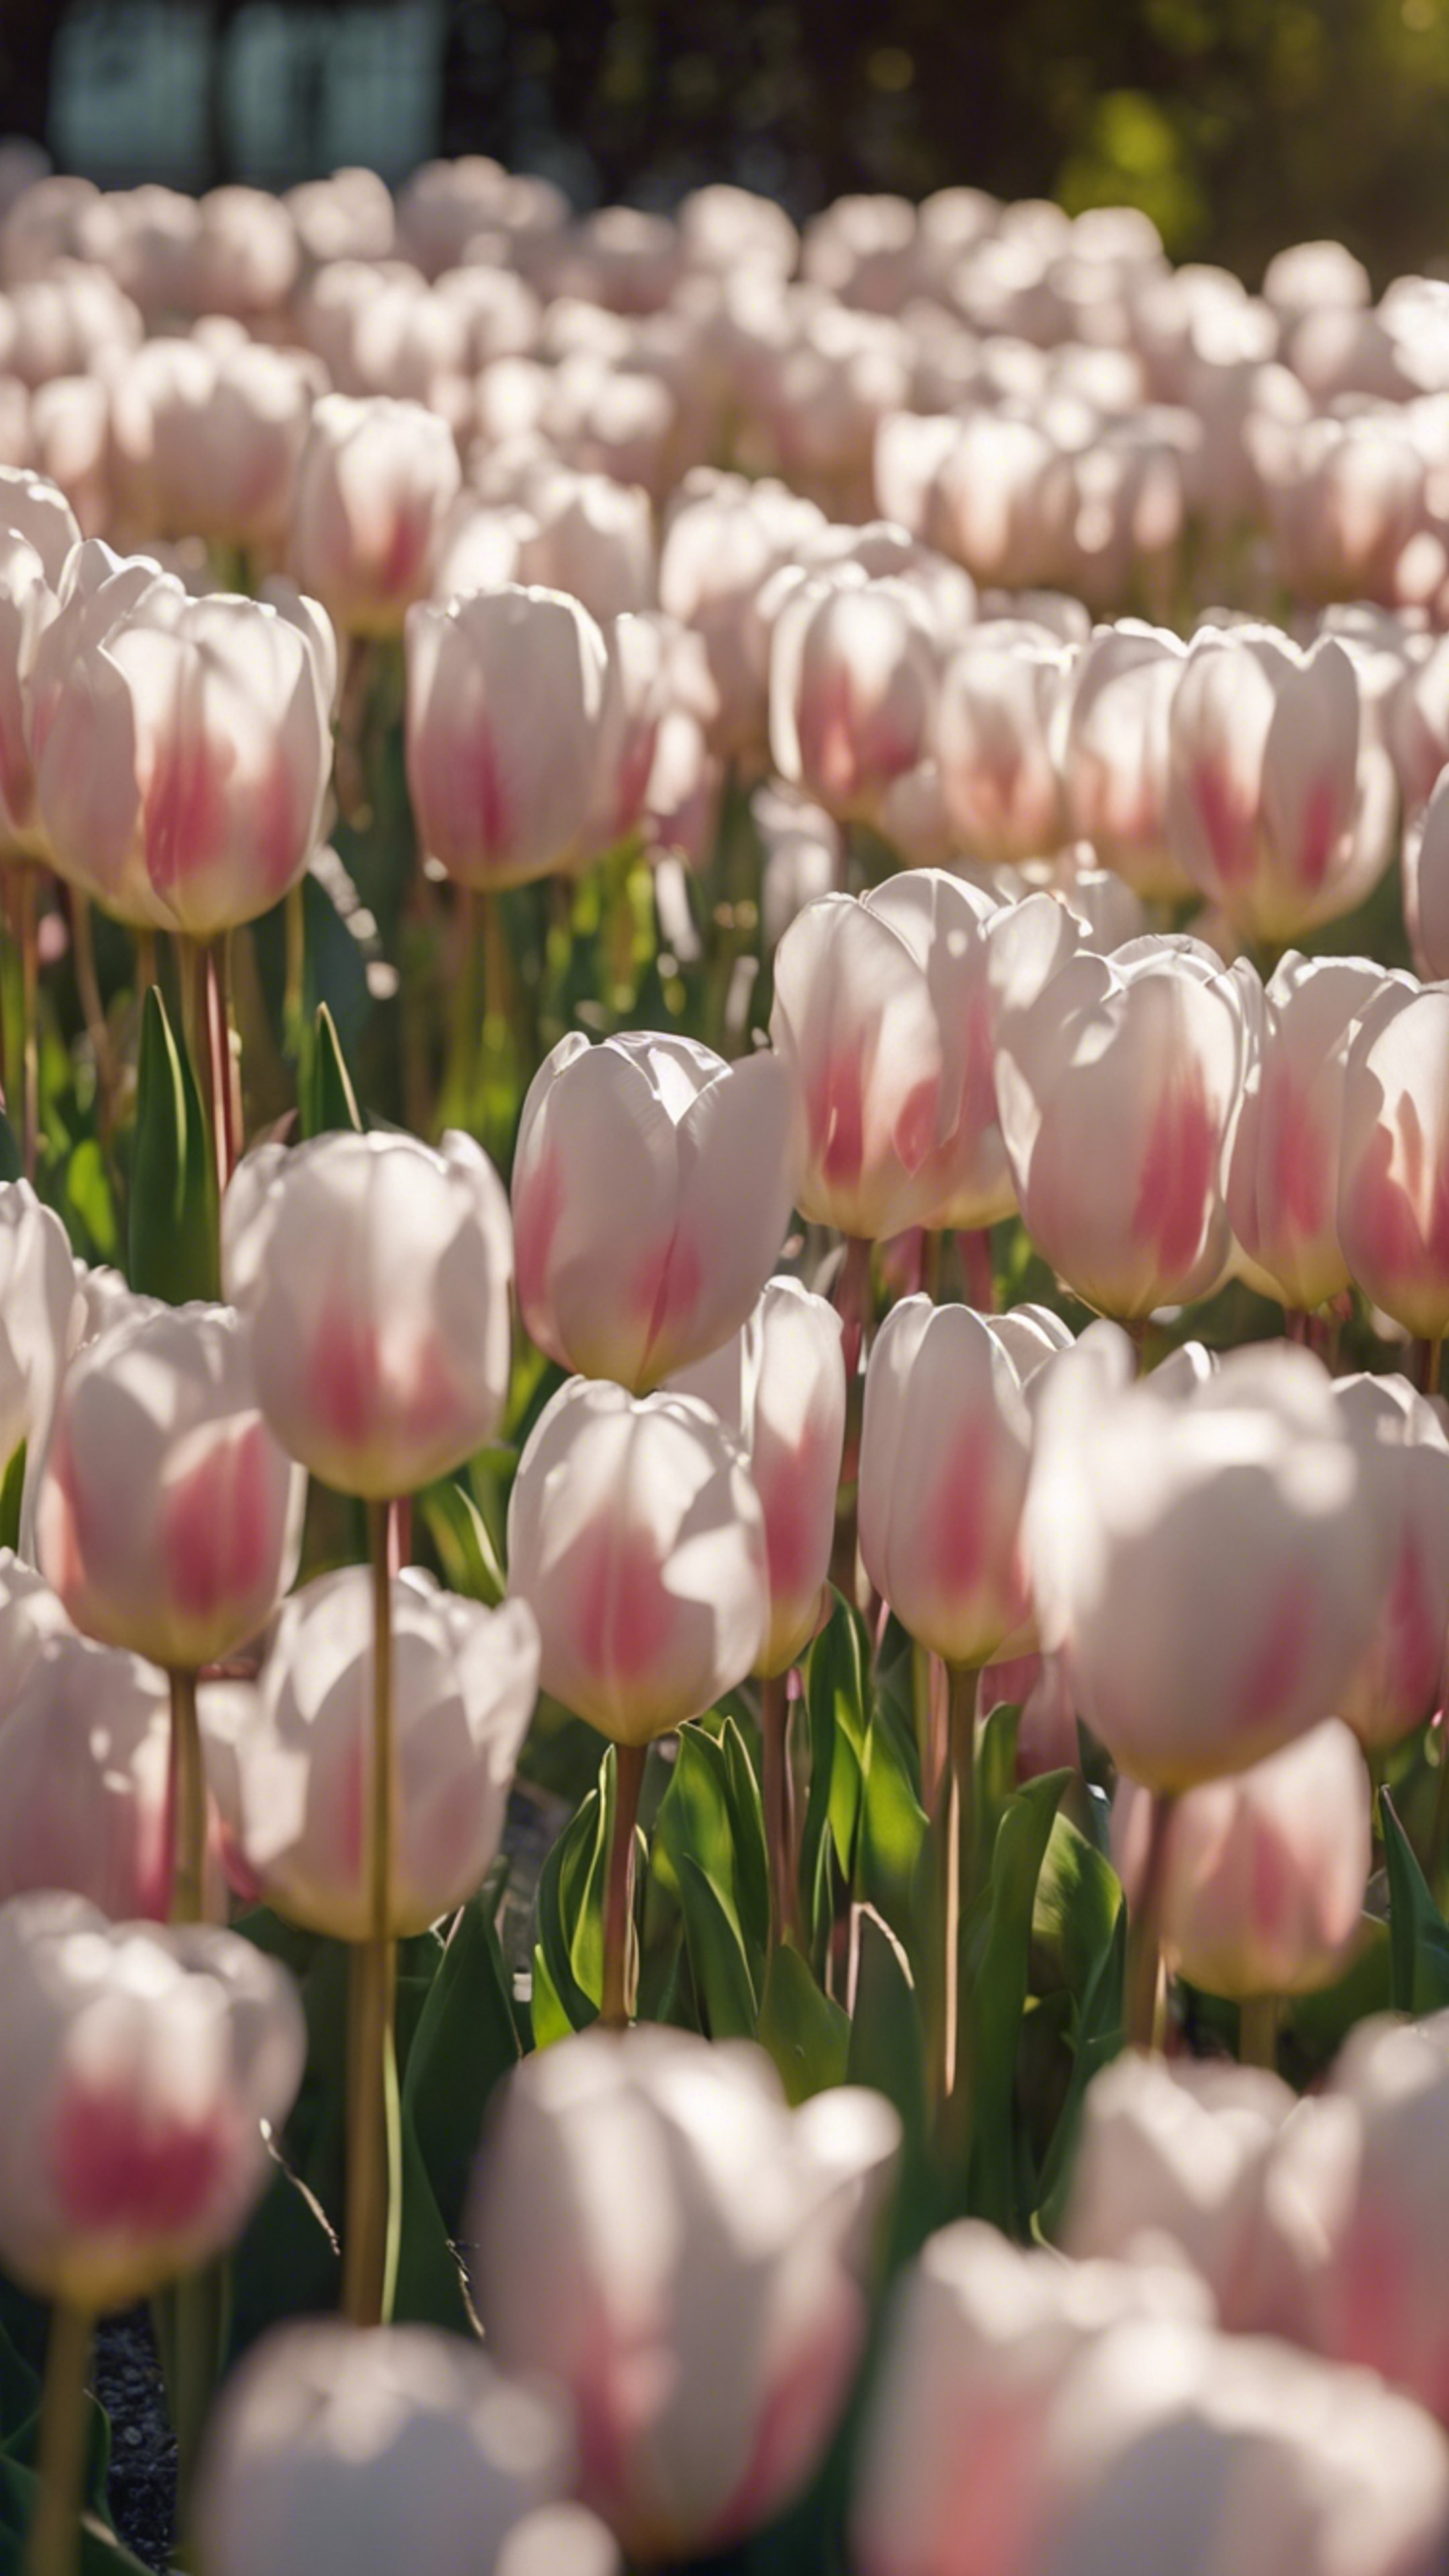 A garden filled with white and pink tulips, shimmering under the soft glow of a morning sun. 牆紙[0043435f230e41f4a509]